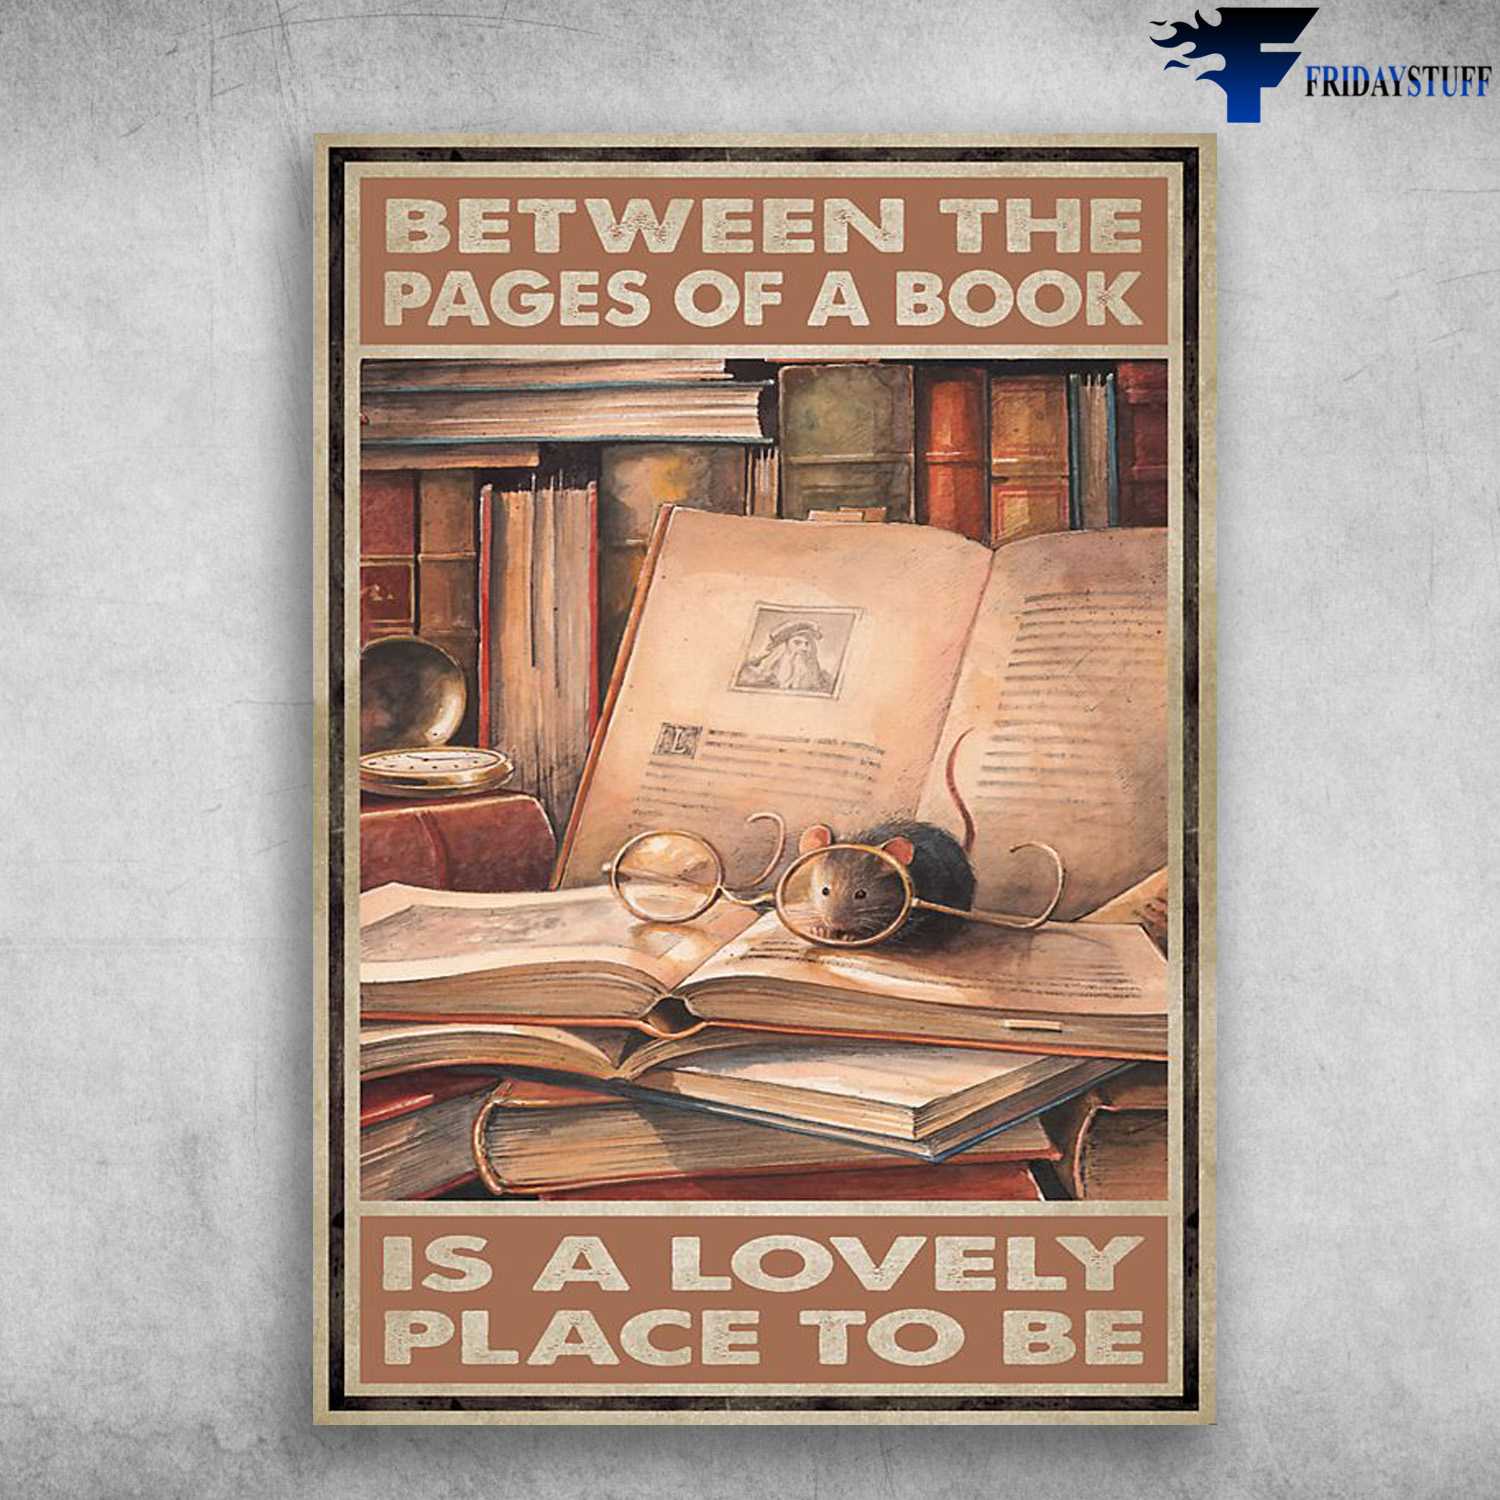 Book Lover, Mouse And Book, Between The Pages Of A Books, Is A Lovely Place To Be